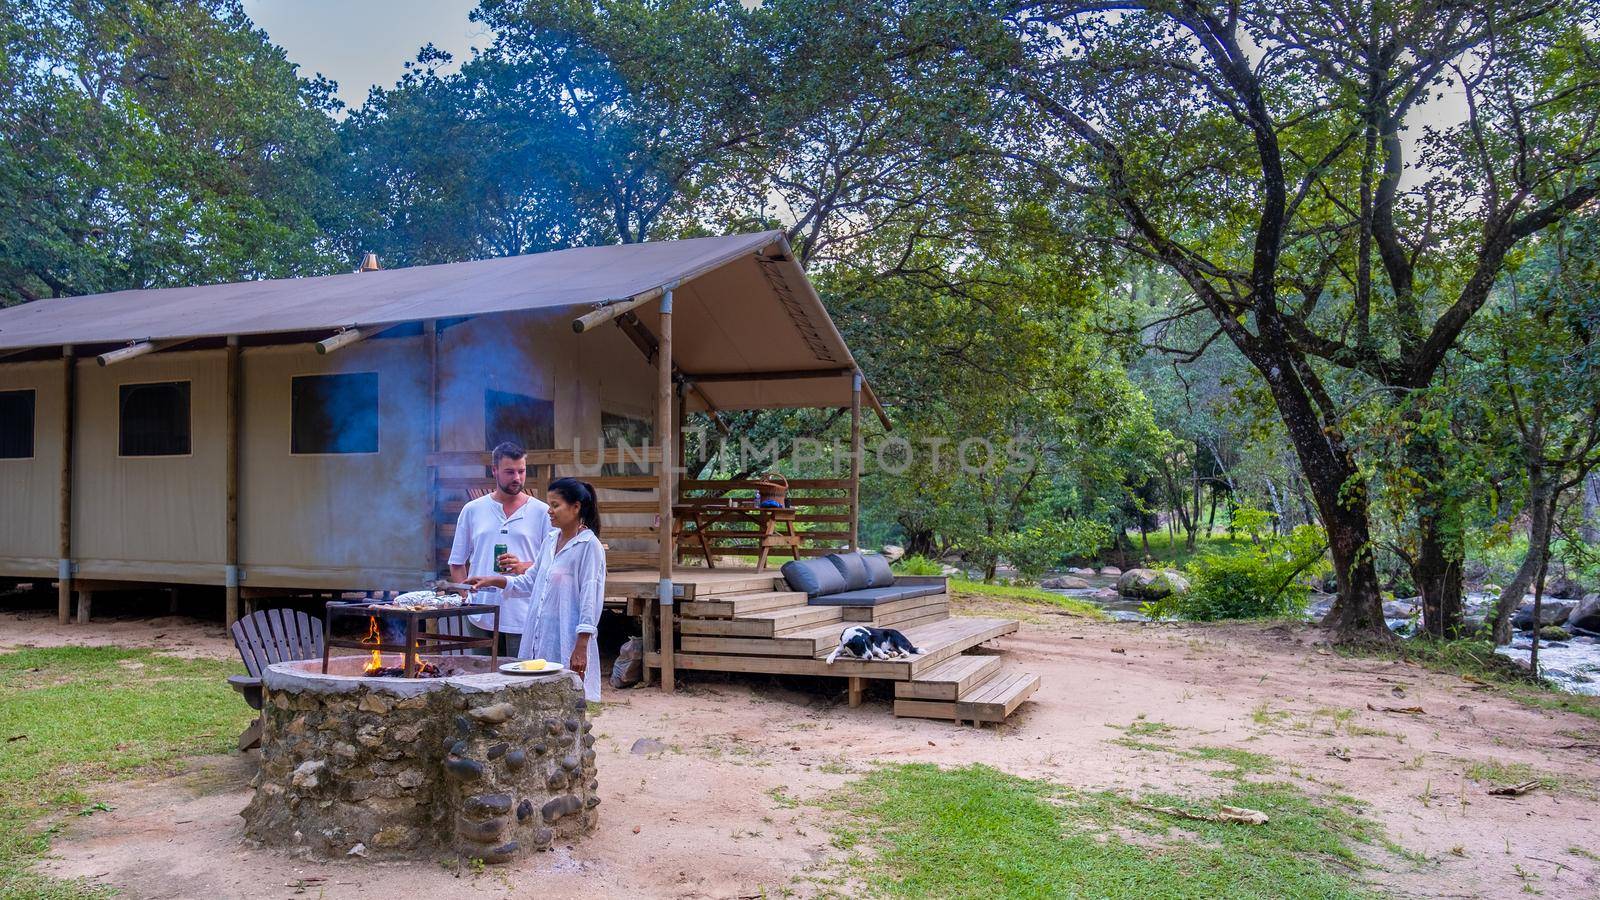 Budget Safari tent in South Africa for family vacations in nature, Safari tented camp in green forest bush nature. Asian women and European men camping